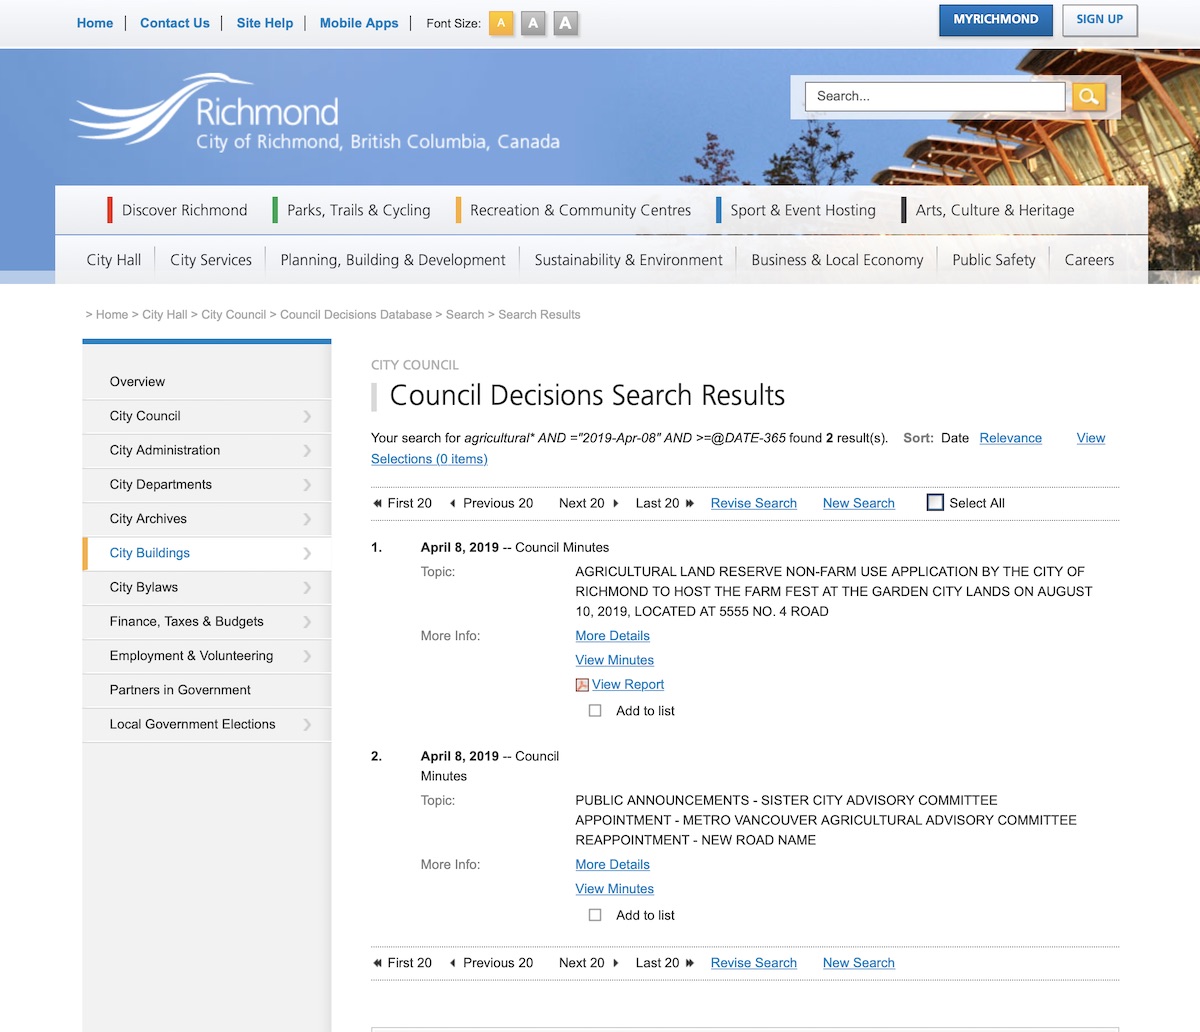 City of Richmond Council Decisions Search Results